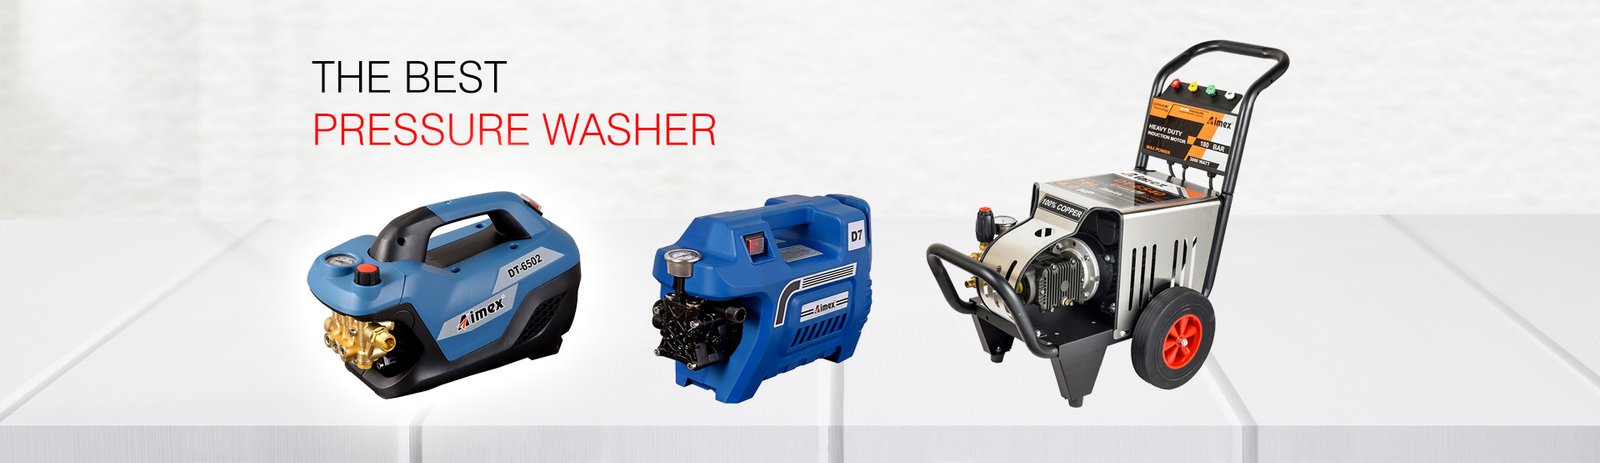 Washer Pump wholesalers in india